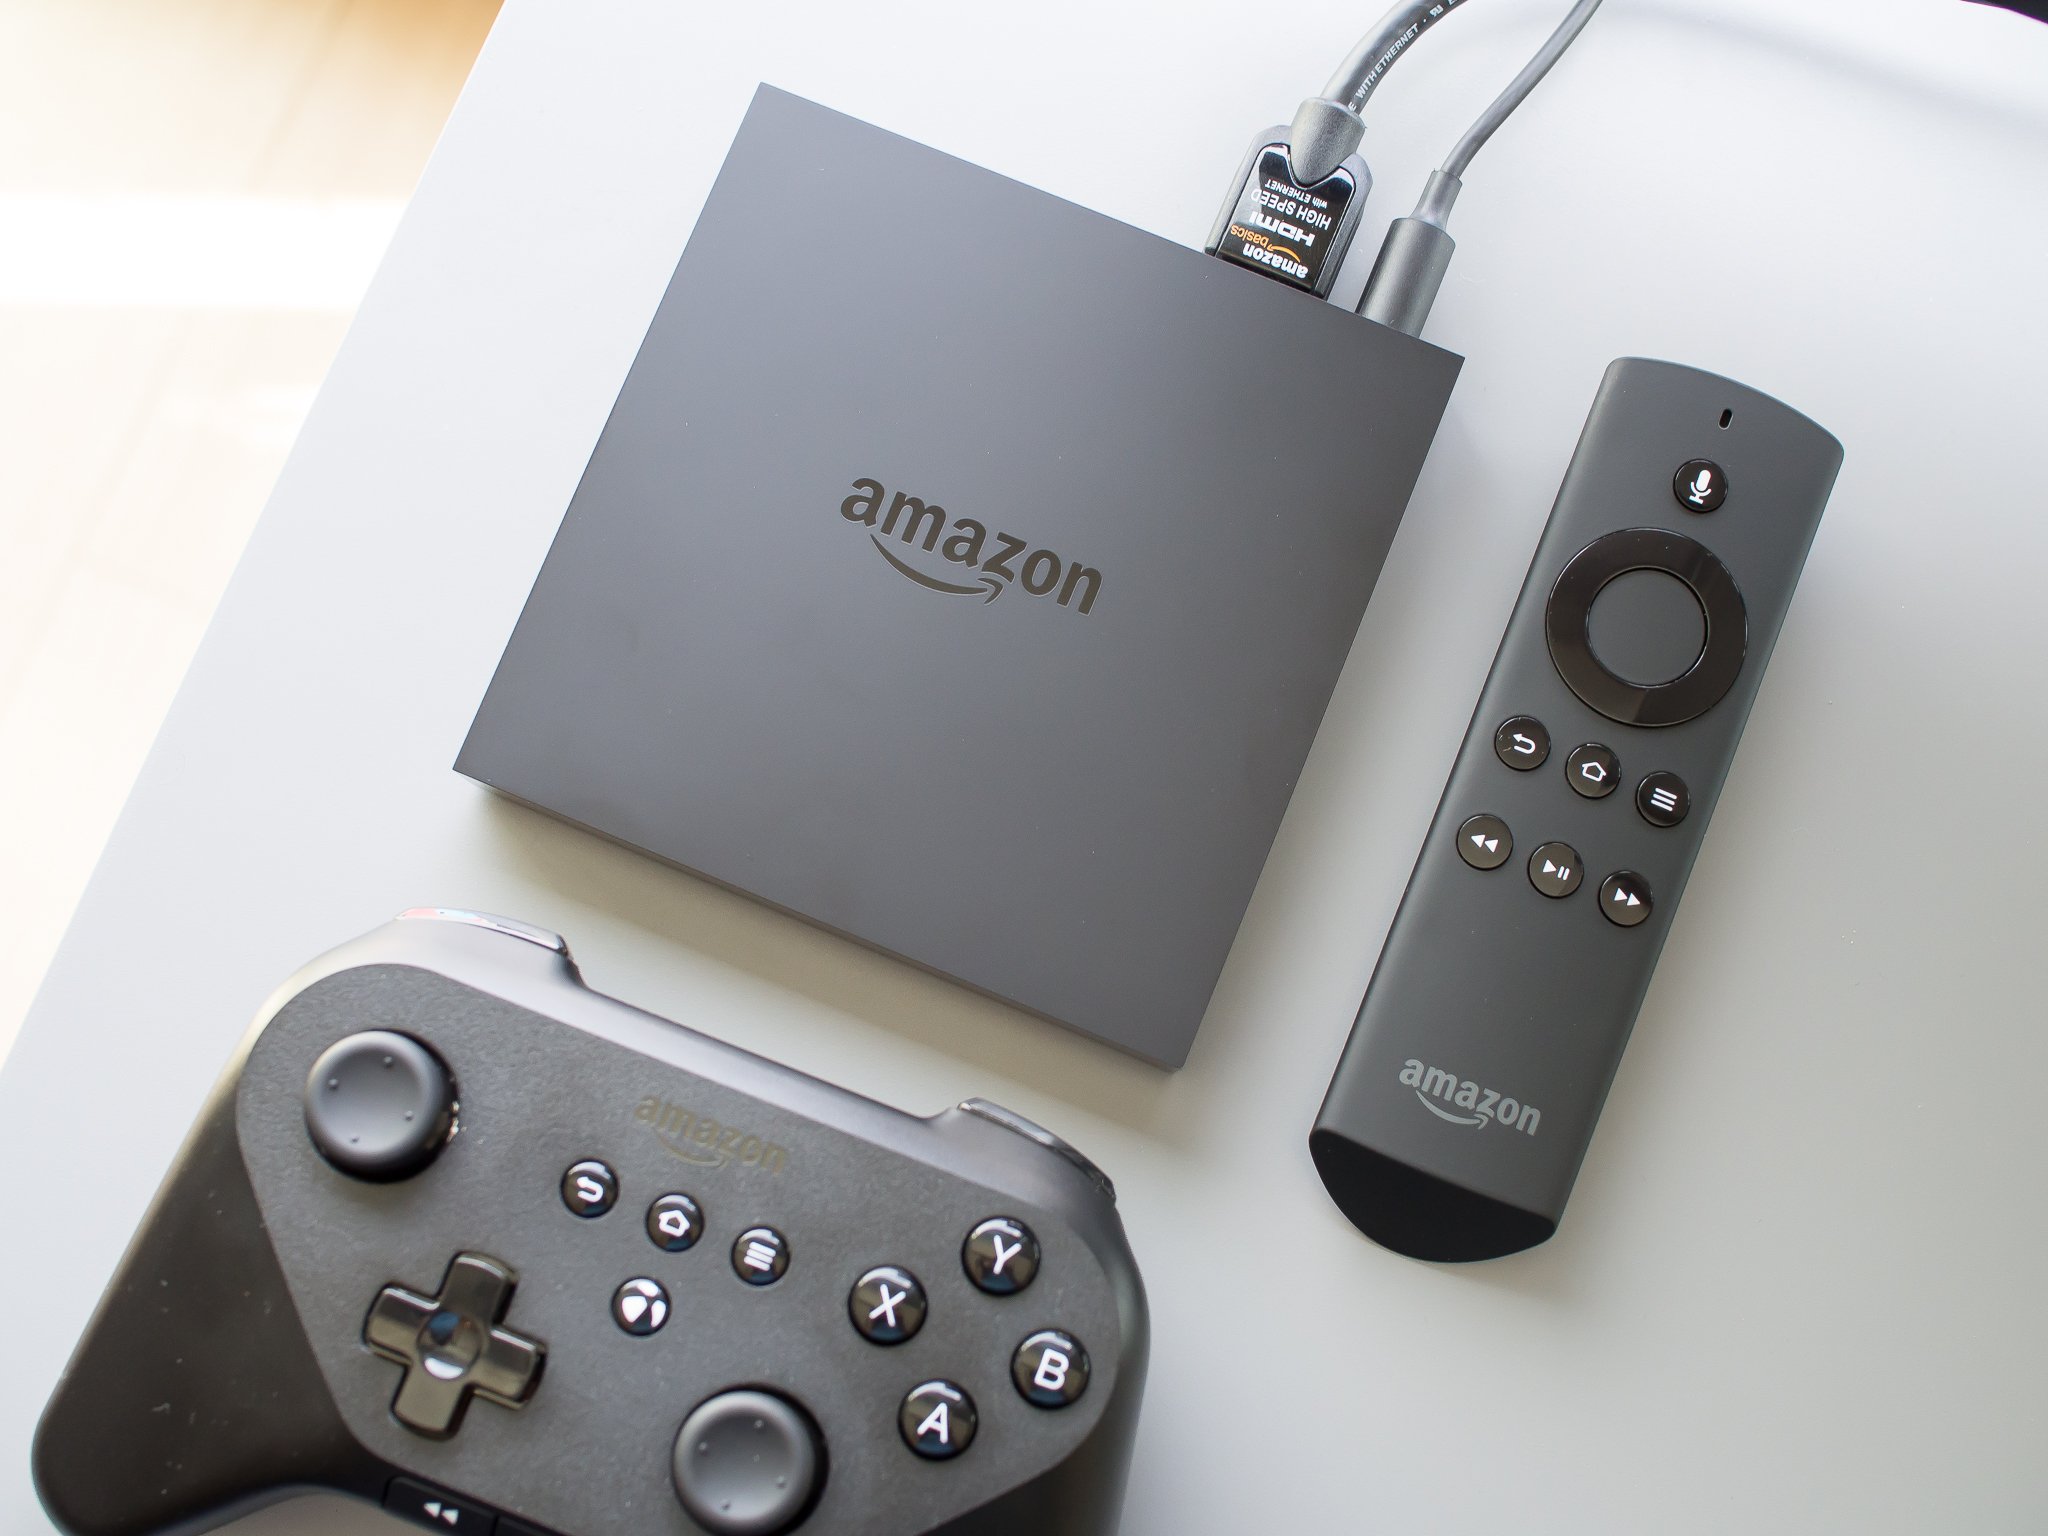 12 Best FireStick Games (Free & Paid) to Play in 2020